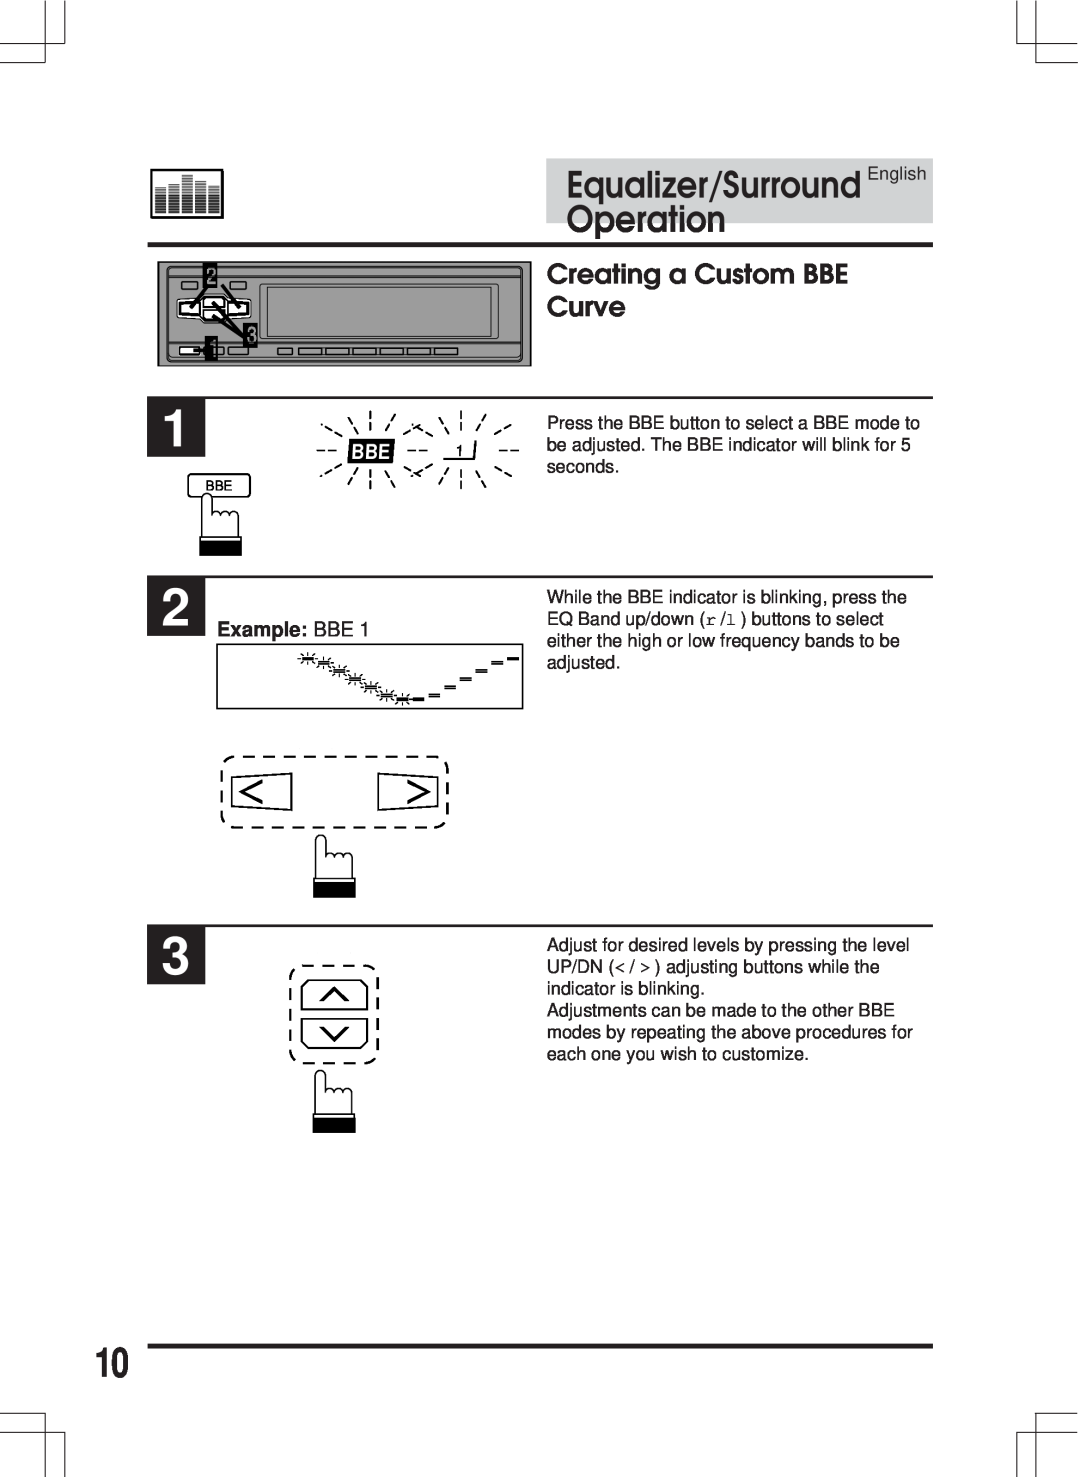 Alpine ERA-G311 owner manual Creating a Custom BBE Curve, Equalizer/Surround English Operation, Example BBE 